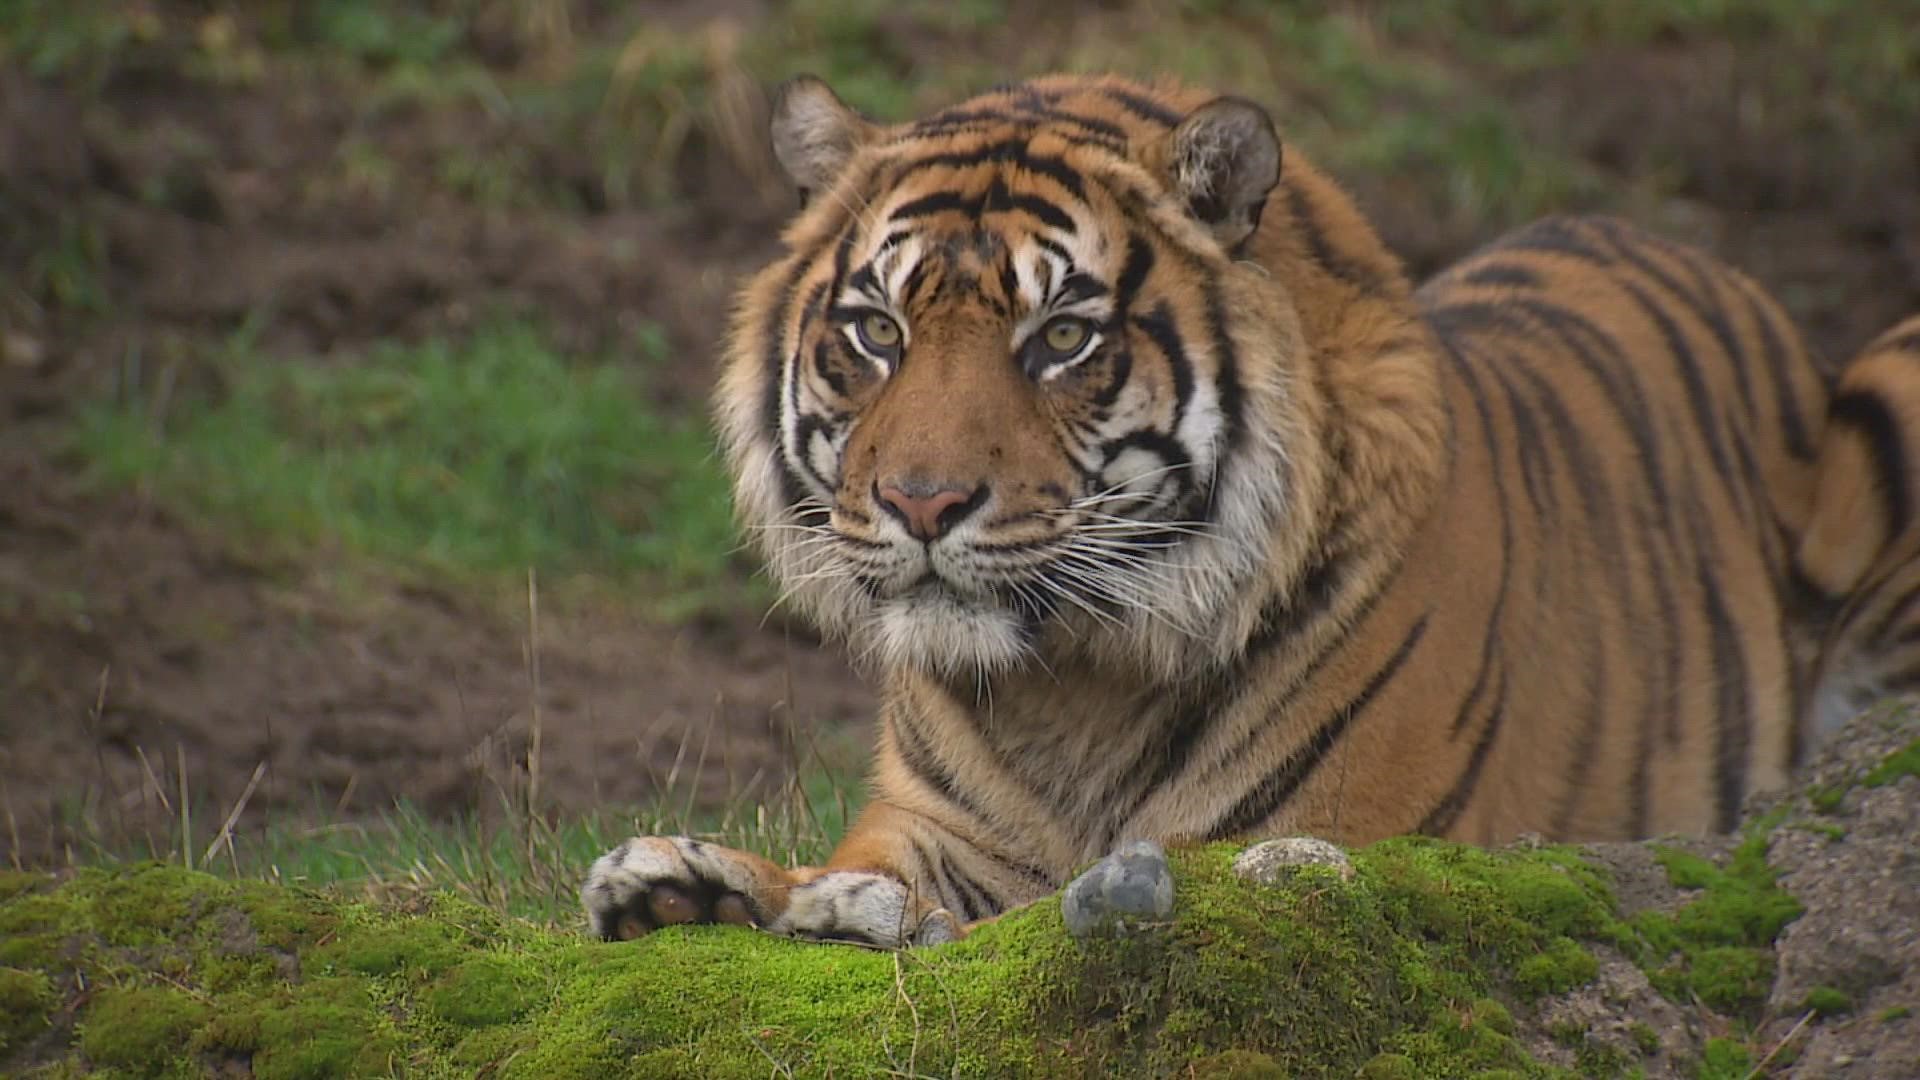 Sumatran tigers are critically endangered in the wild, with only about 400 to 500 remaining on their native Indonesian island of Sumatra.